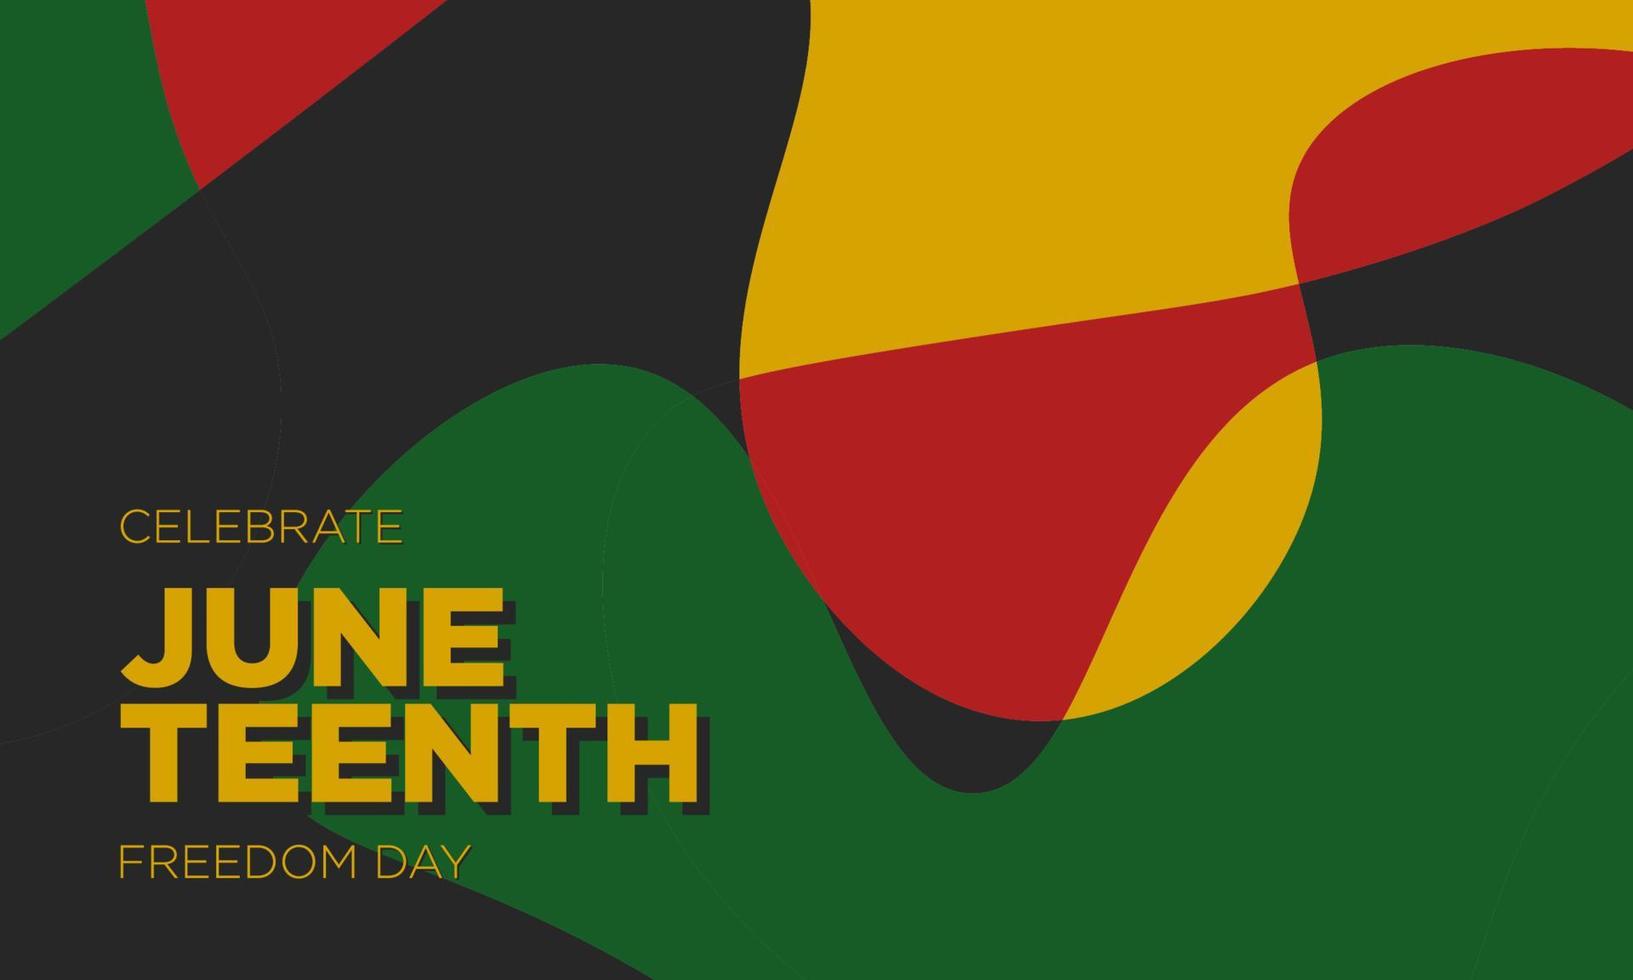 Juneteenth Freedom Day Background Design. vector